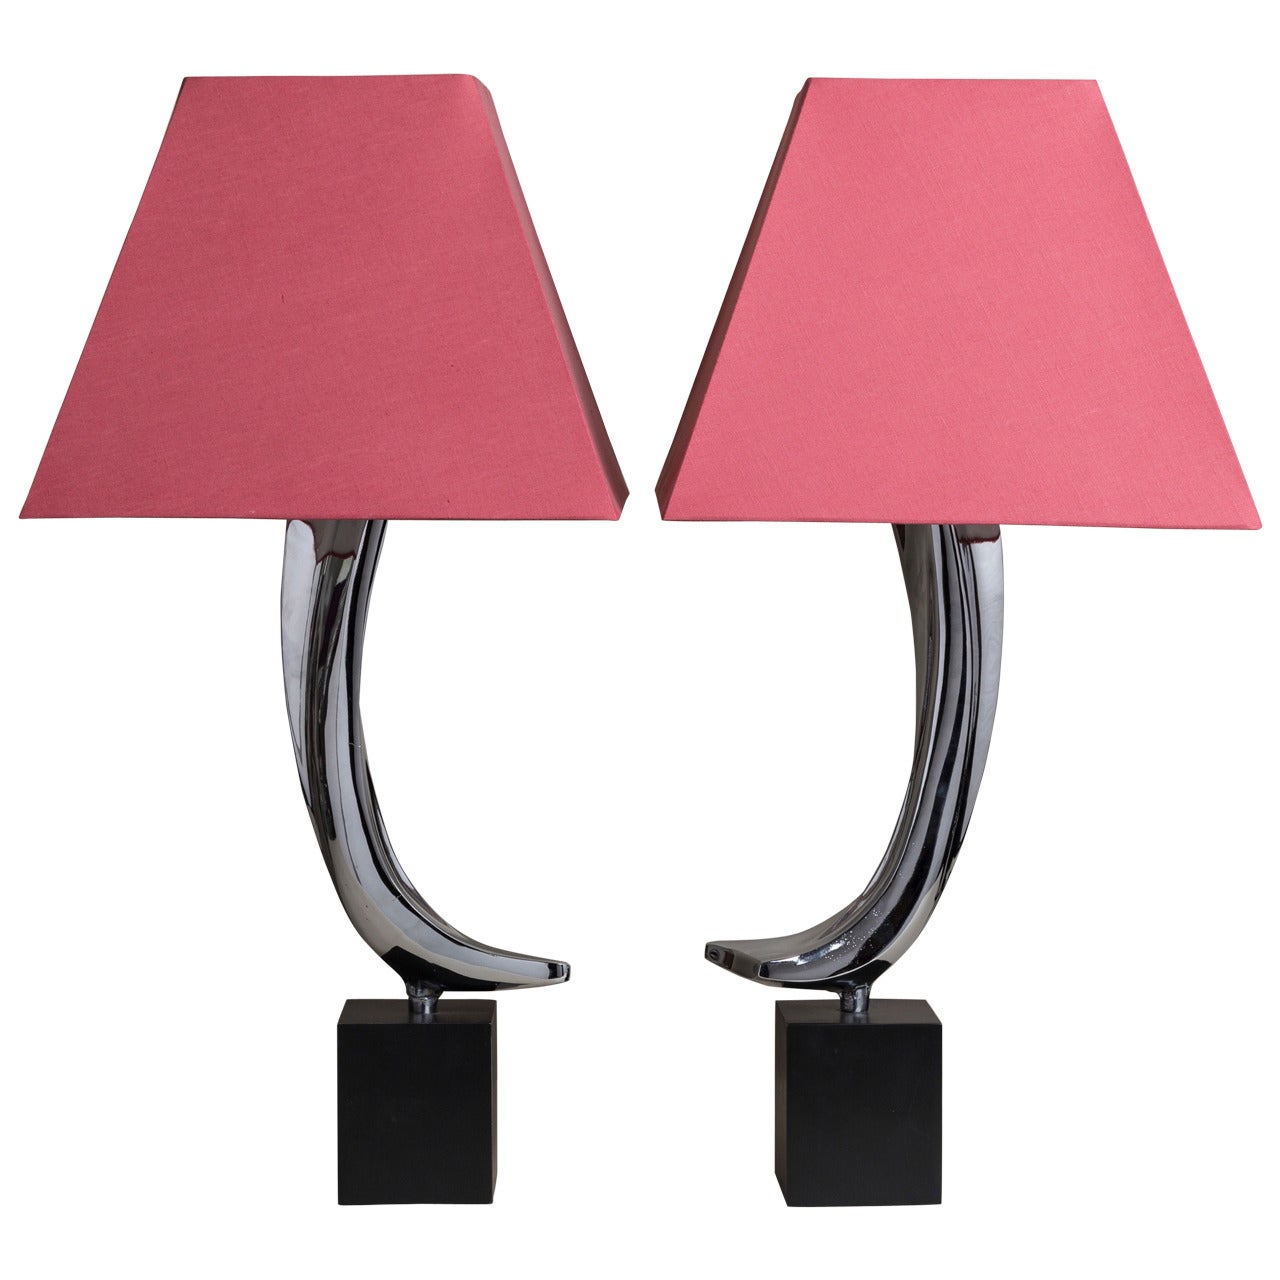 Pair of Nickel-Plated Table Lamps by Laurel, USA, 1960s For Sale